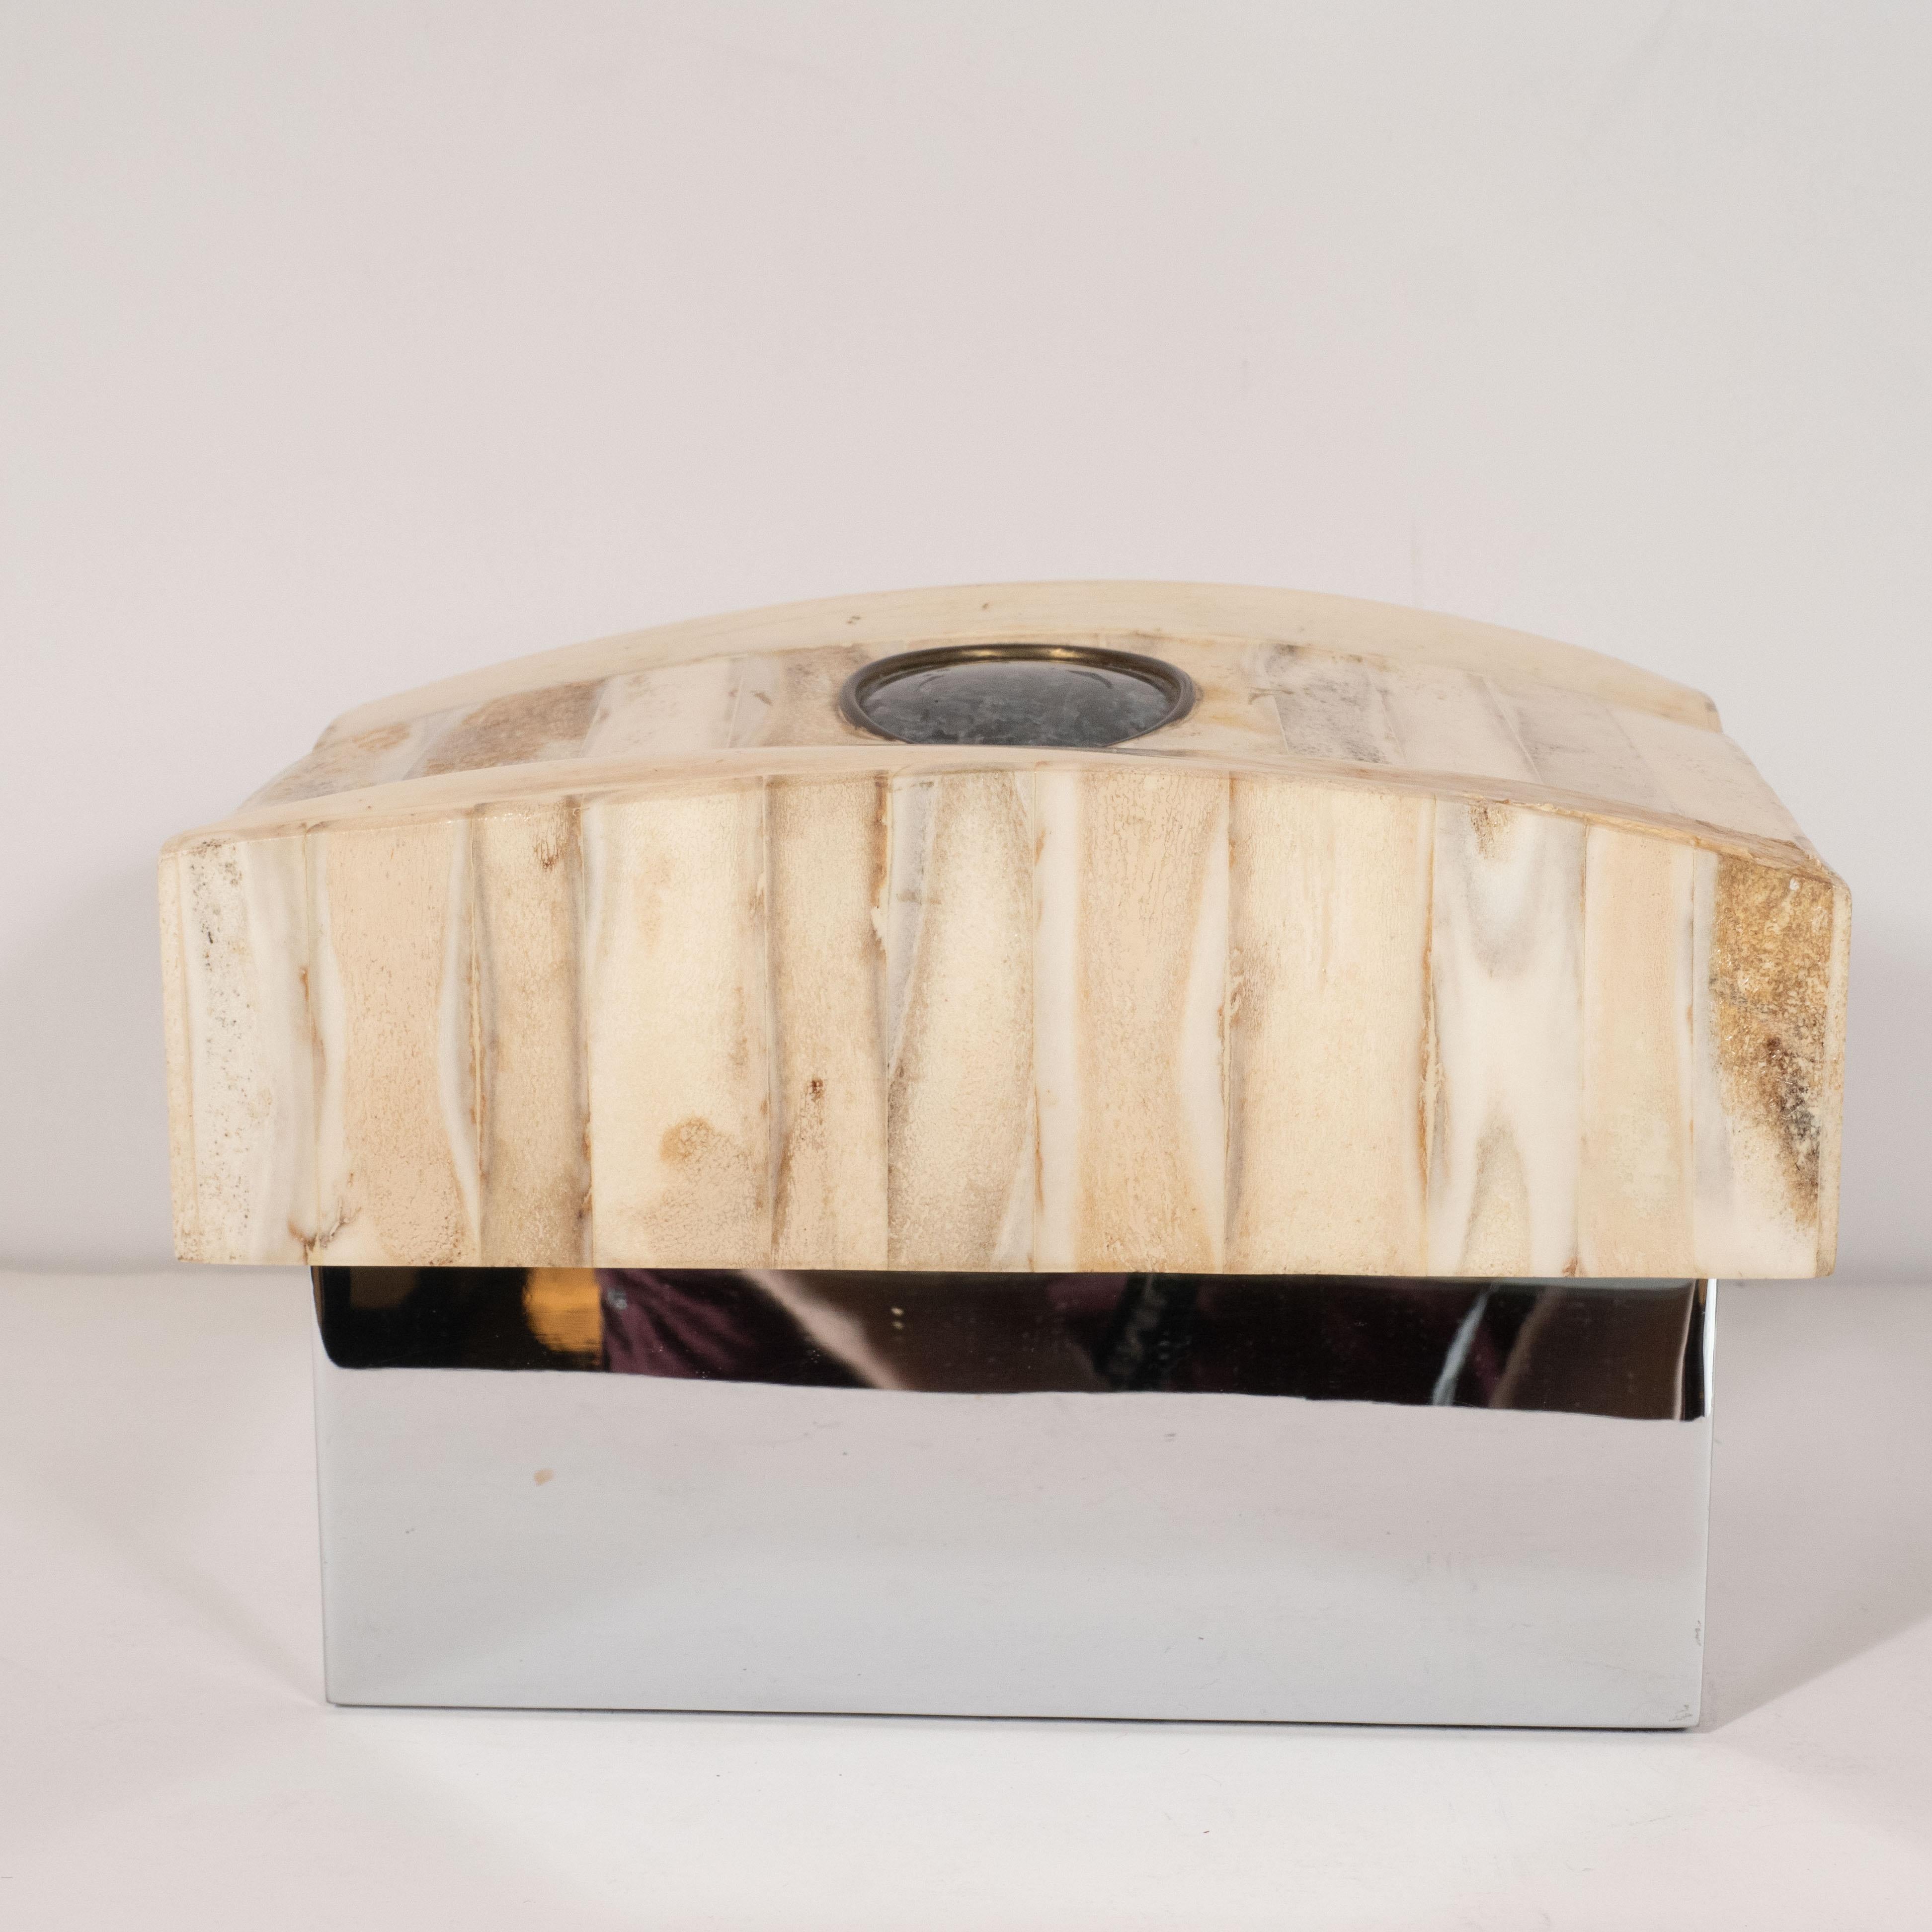 This bold and sophisticated decorative box was realized by the esteemed artisans Gene Jonson and Robert Marcius in the United States, circa 1970. This is a particularly stunning example of their practice. It features a tessellated antler top-